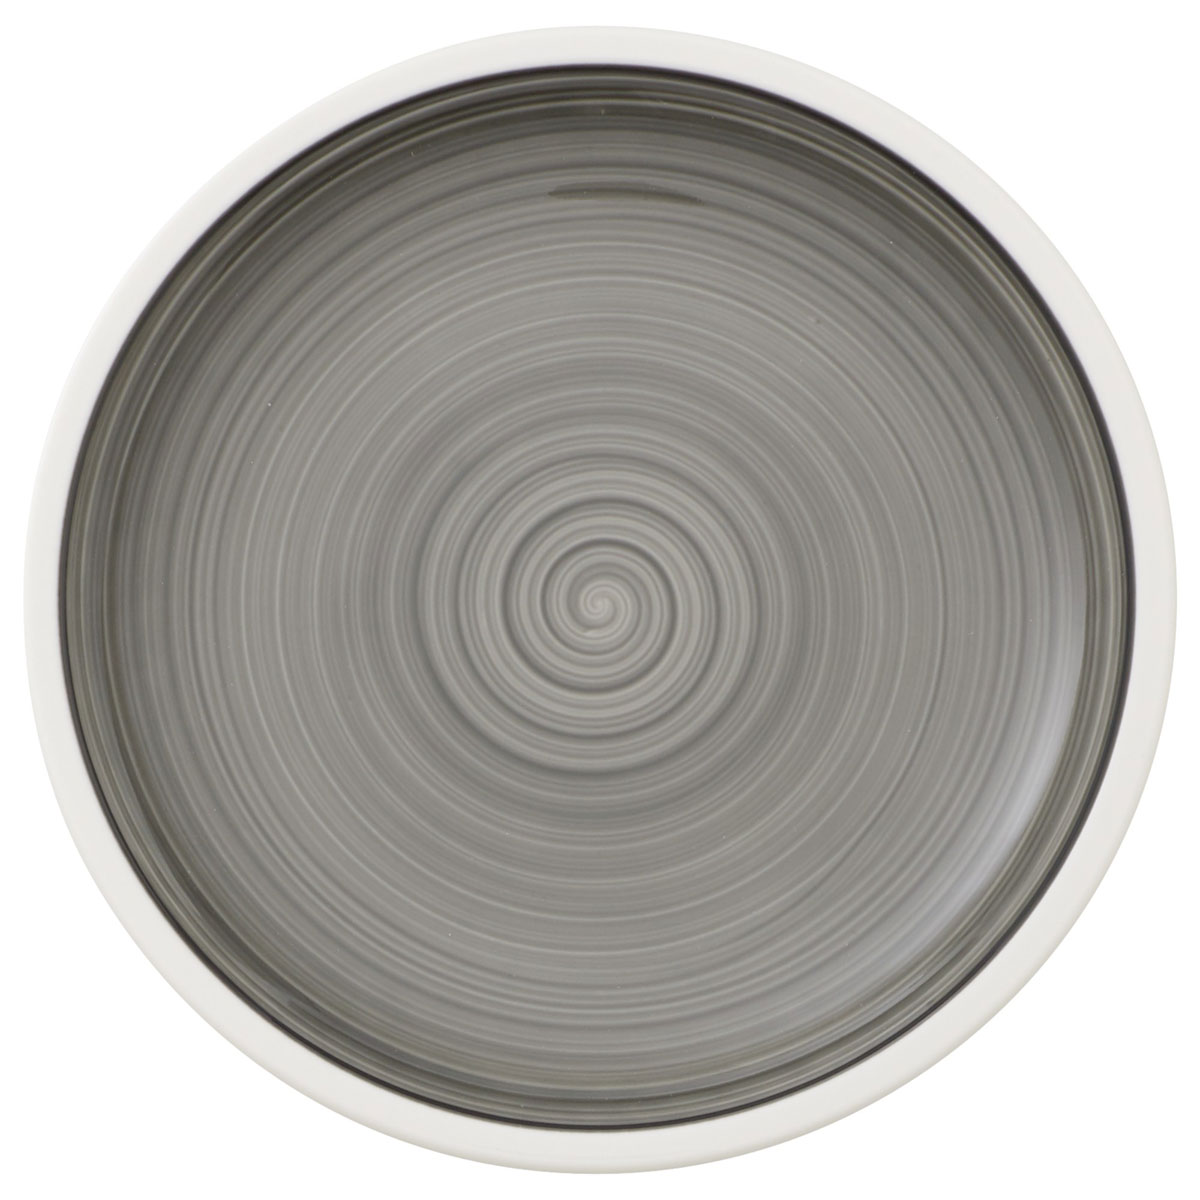 Villeroy and Boch Manufacture Gris Bread and Butter Plate